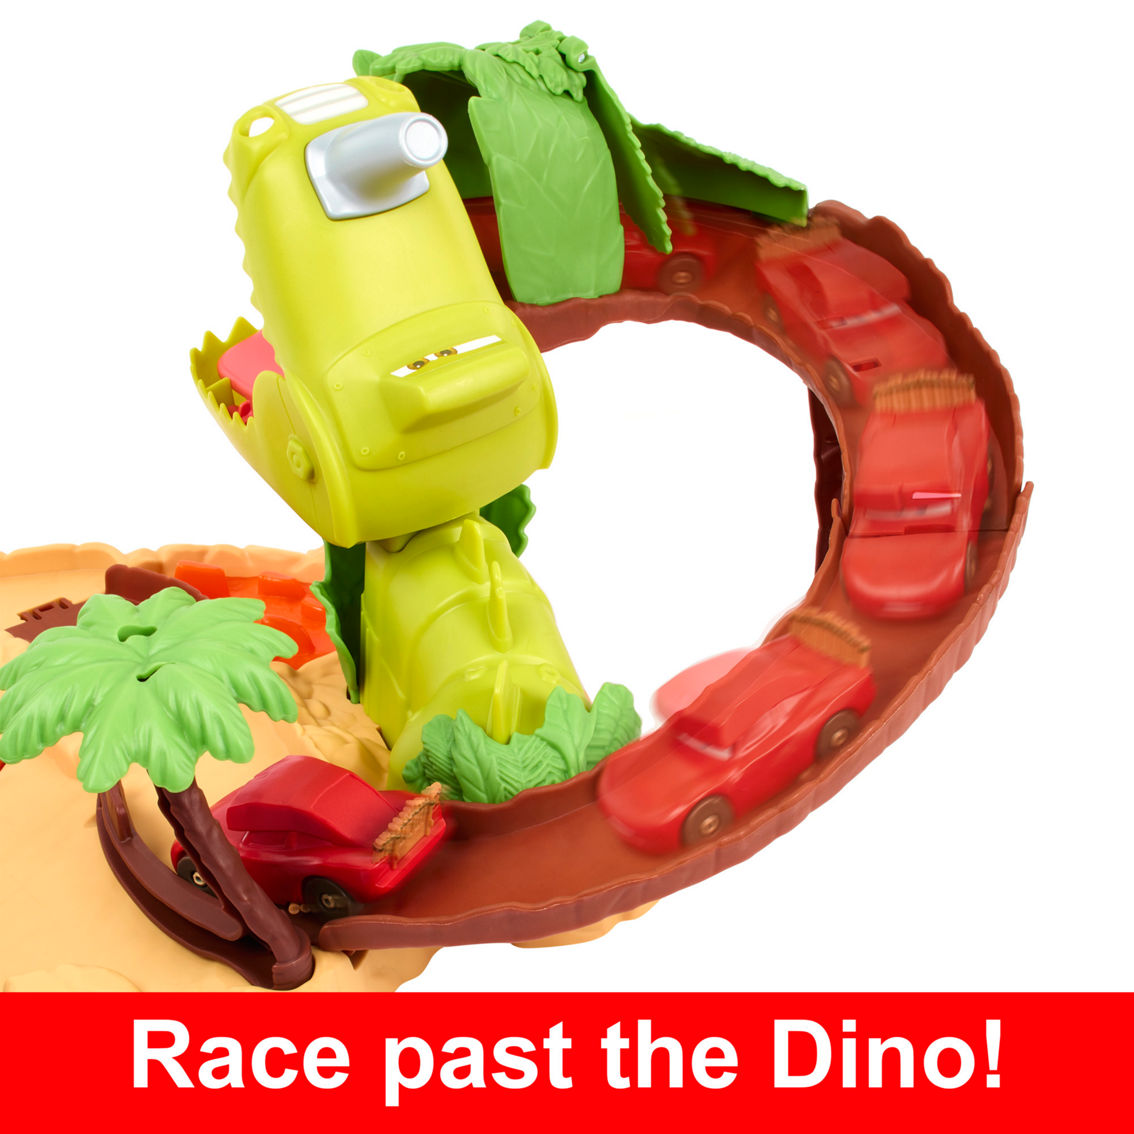 Disney and Pixar Cars On the Road Dino Playground Playset - Image 3 of 5